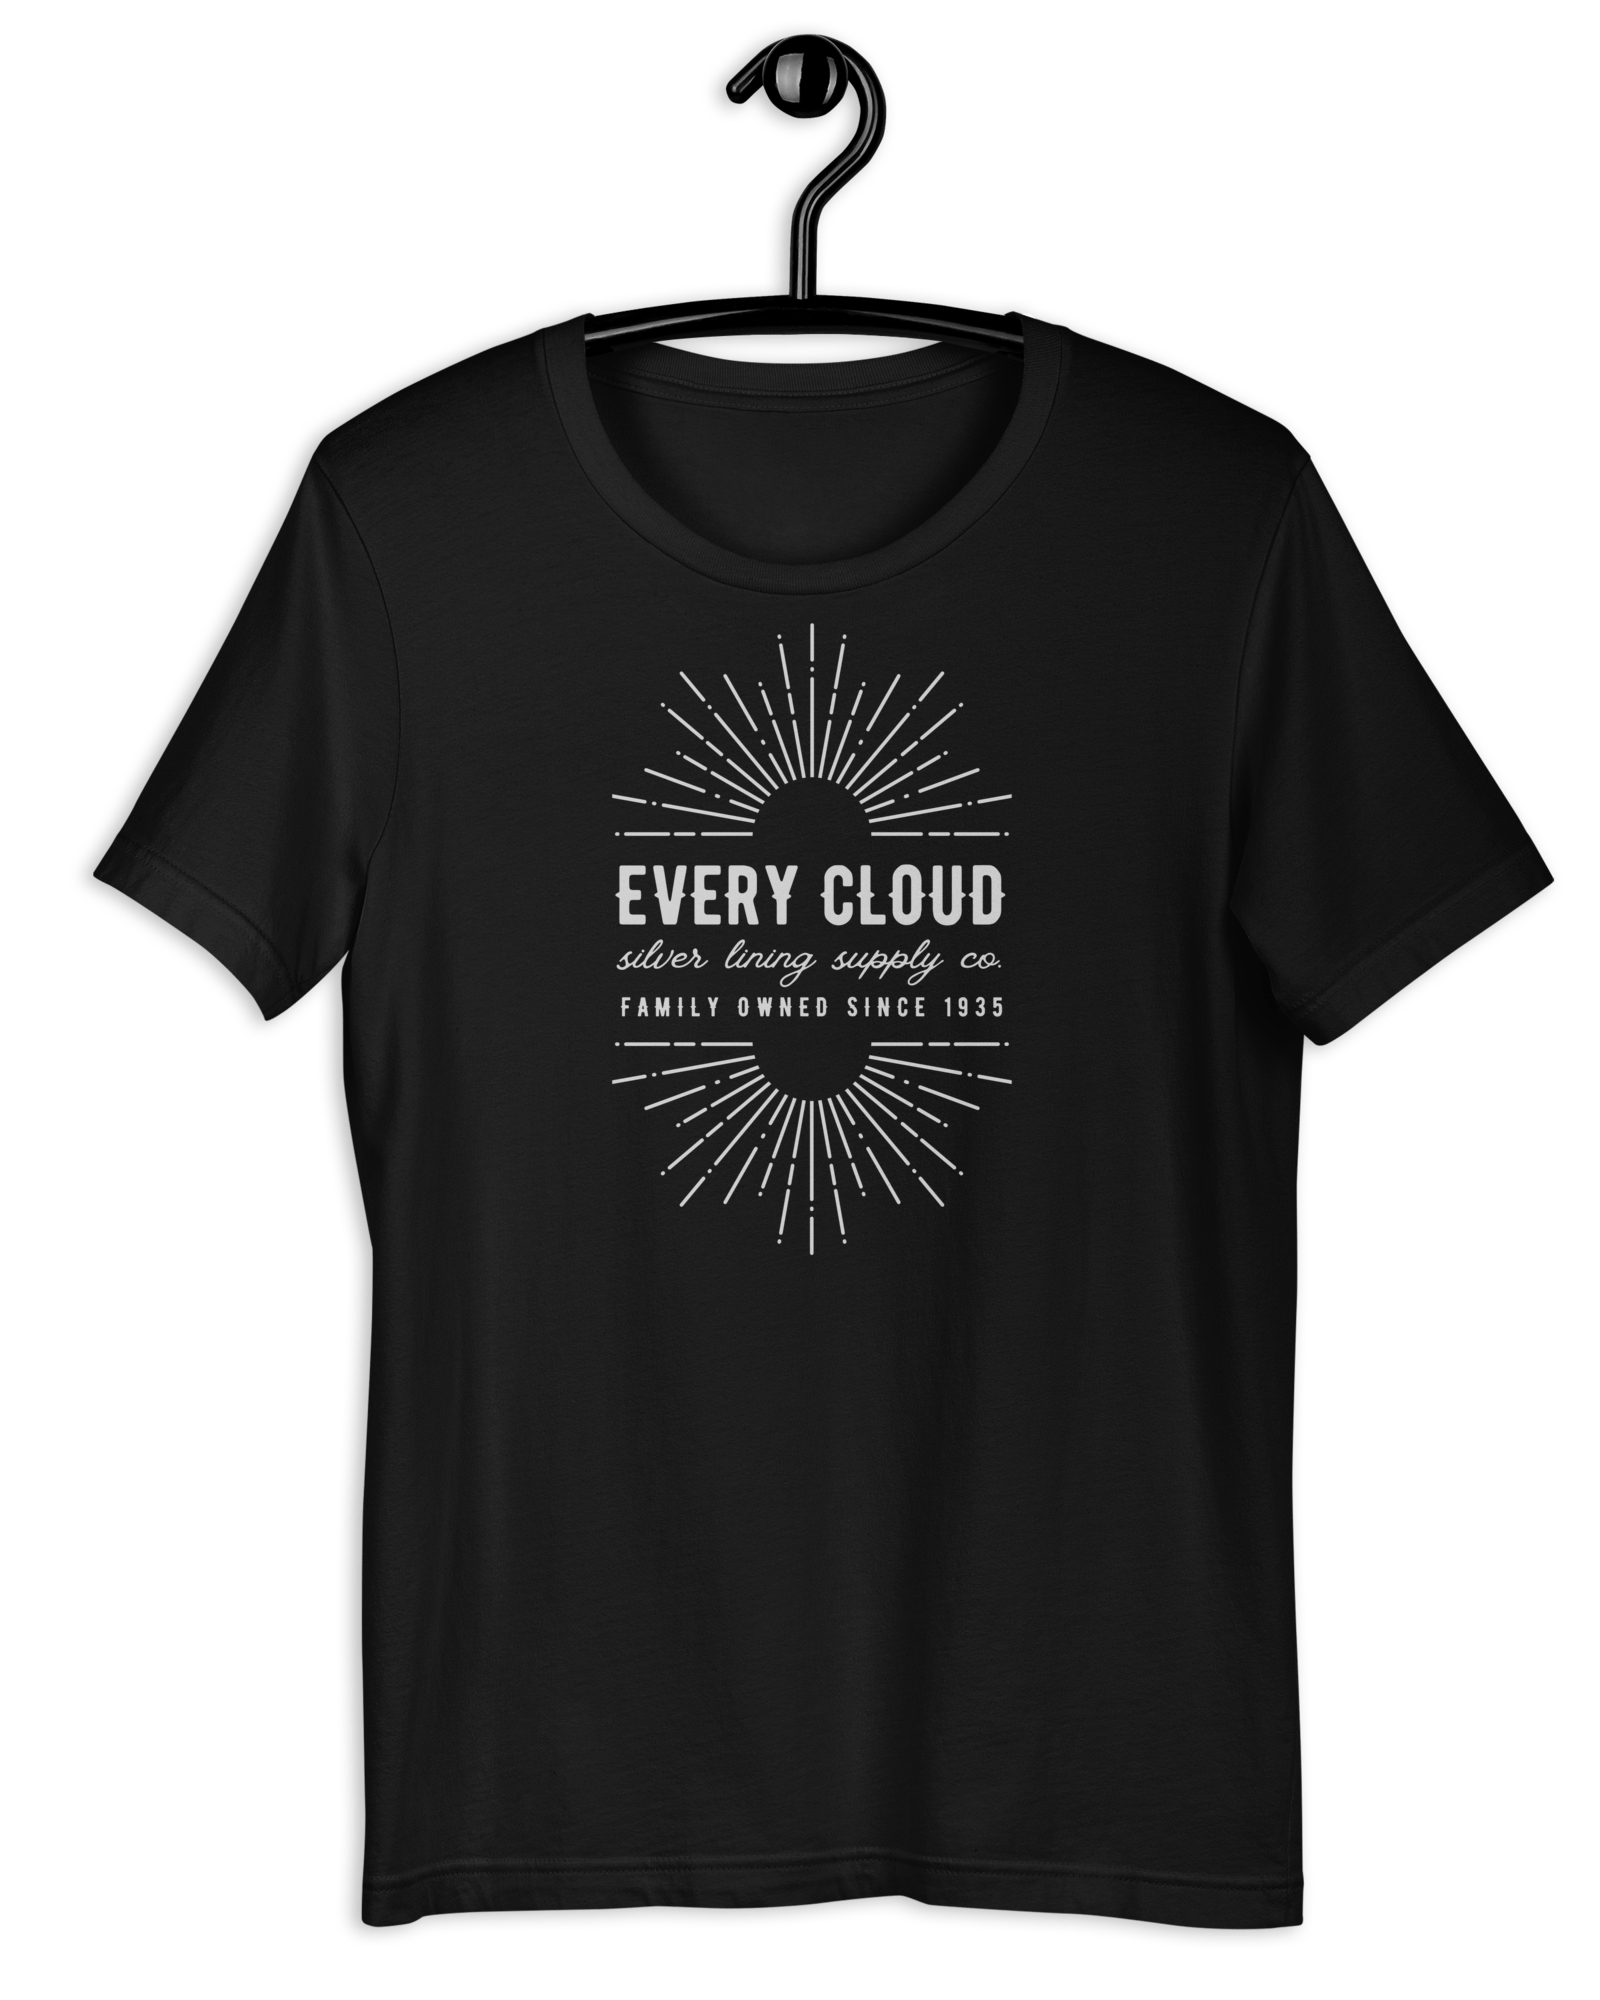 Every Cloud Silver Lining Supply Co. T-shirt Black / XS Jolly & Goode